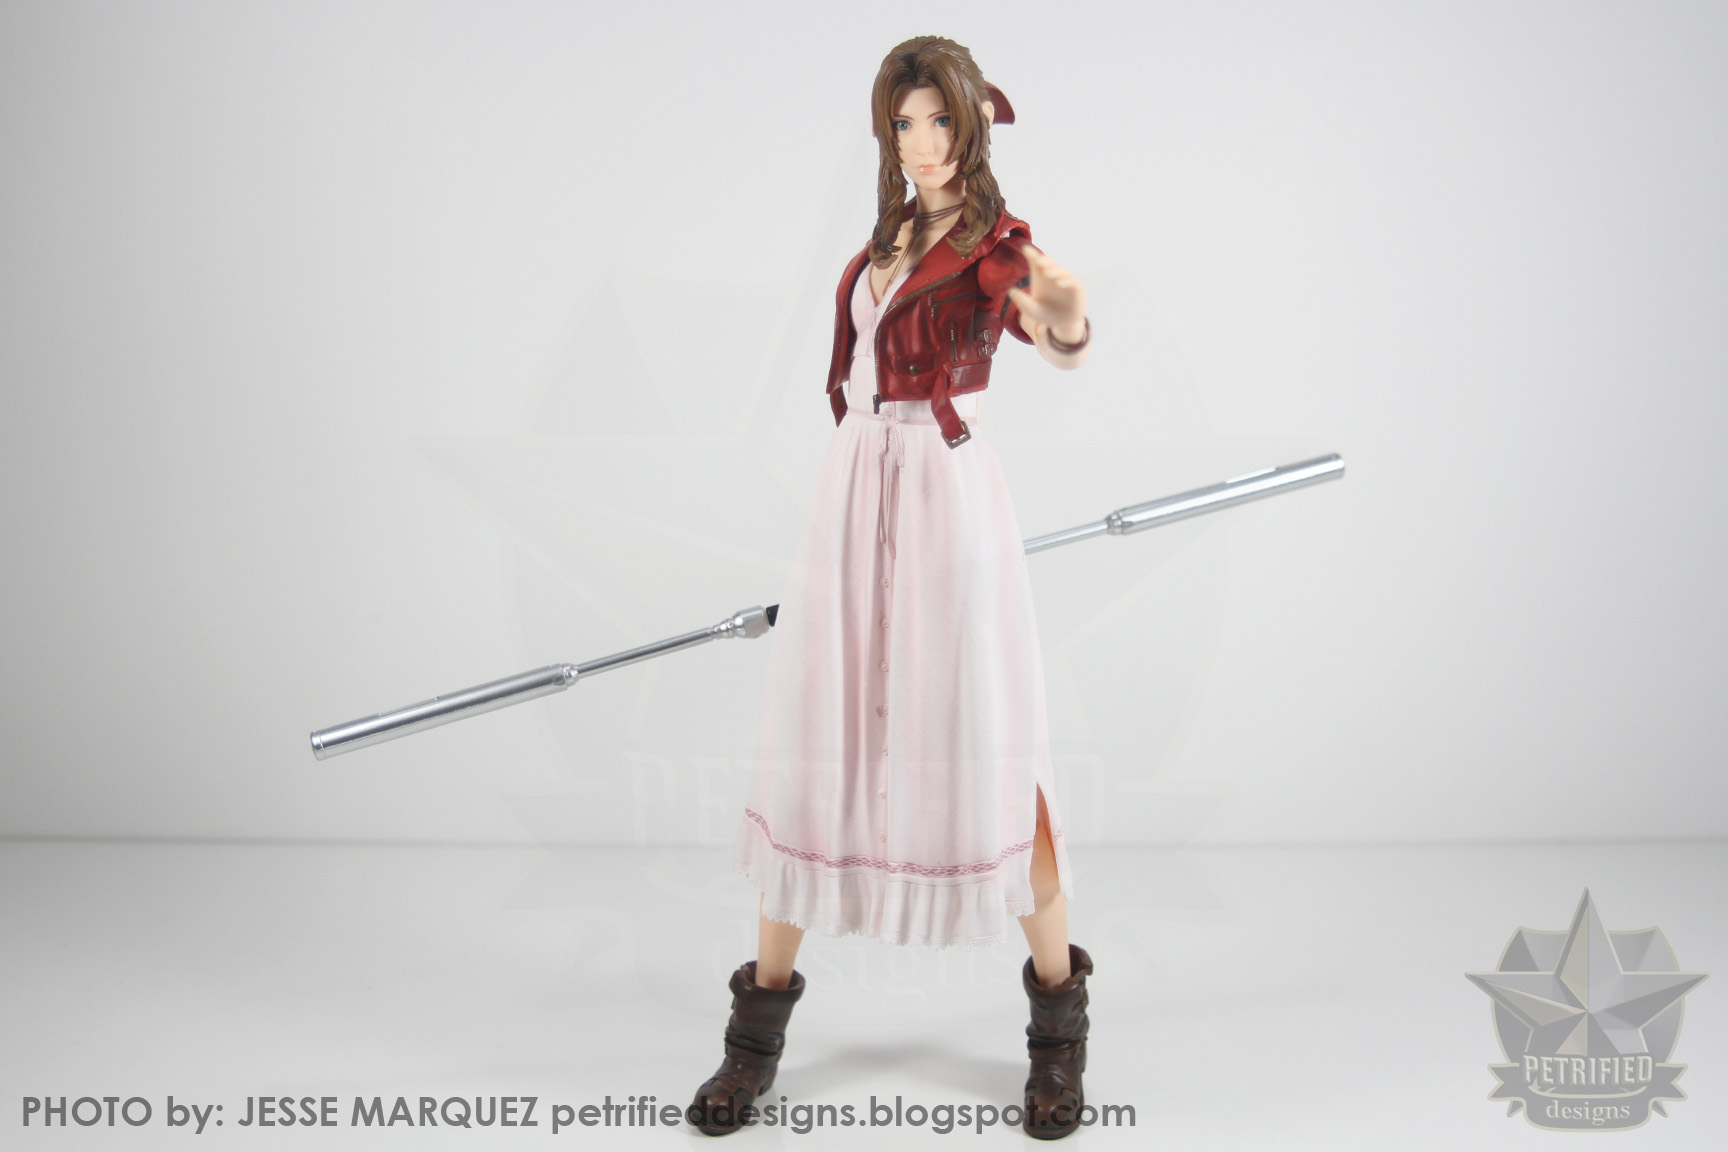 You can now play as Aerith from Final Fantasy 7 Remake in Resident